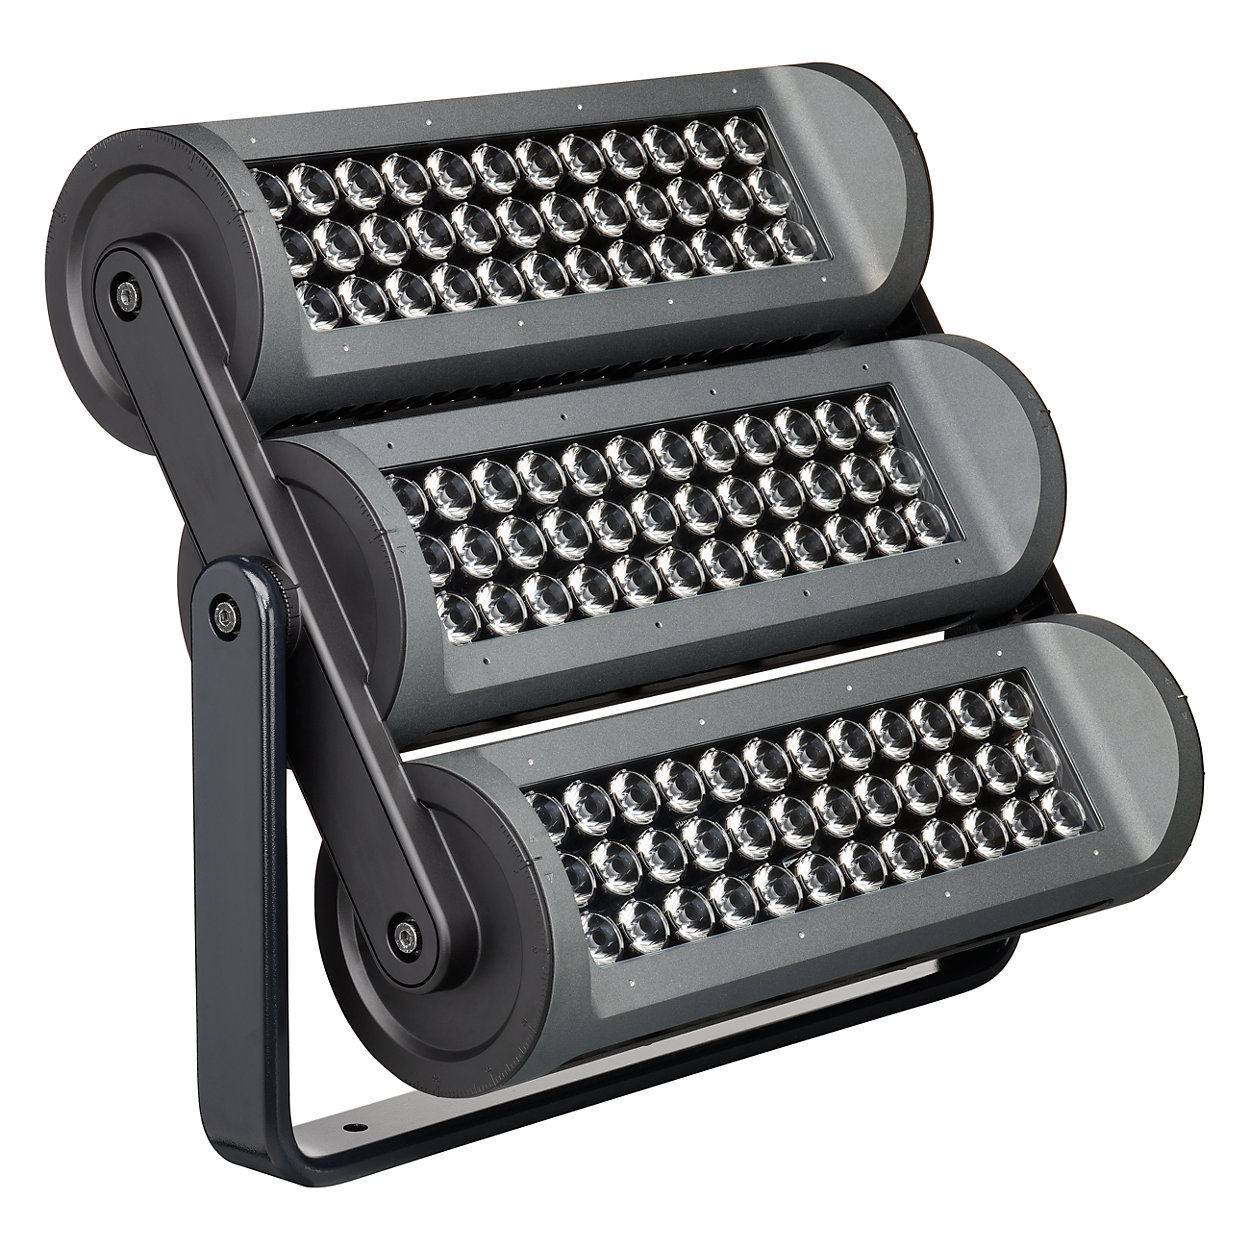 High-performance long-throw exterior LED luminaire with RGBA or RGBW light